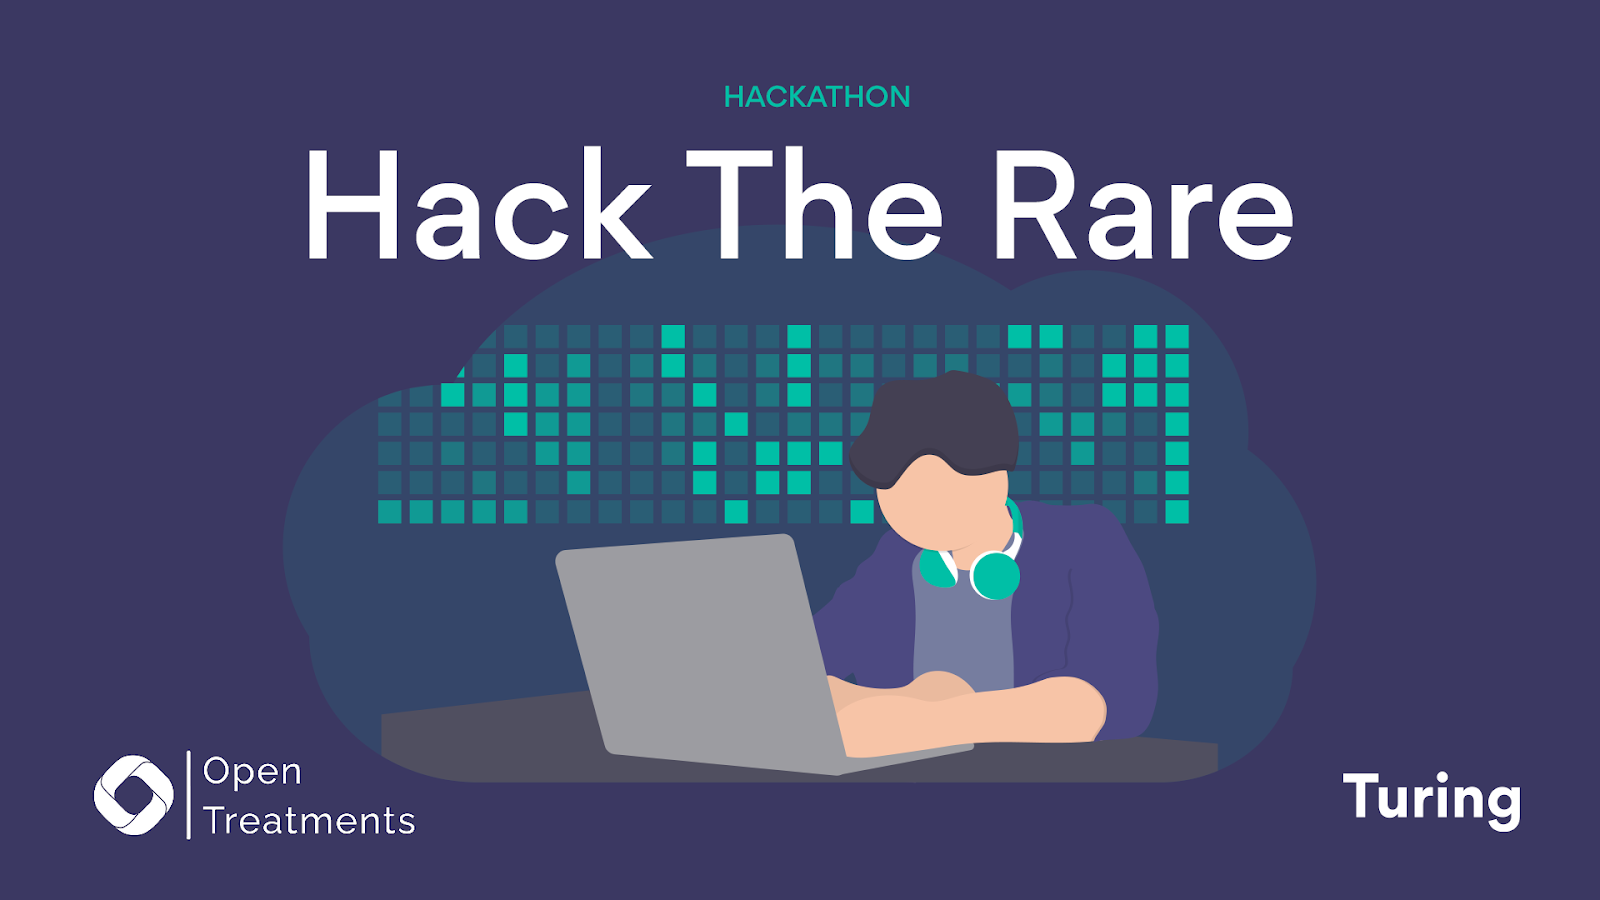 Hack The Rare Hackathon: Turing Developers Come Together to Build Software for Rare Disease Treatments